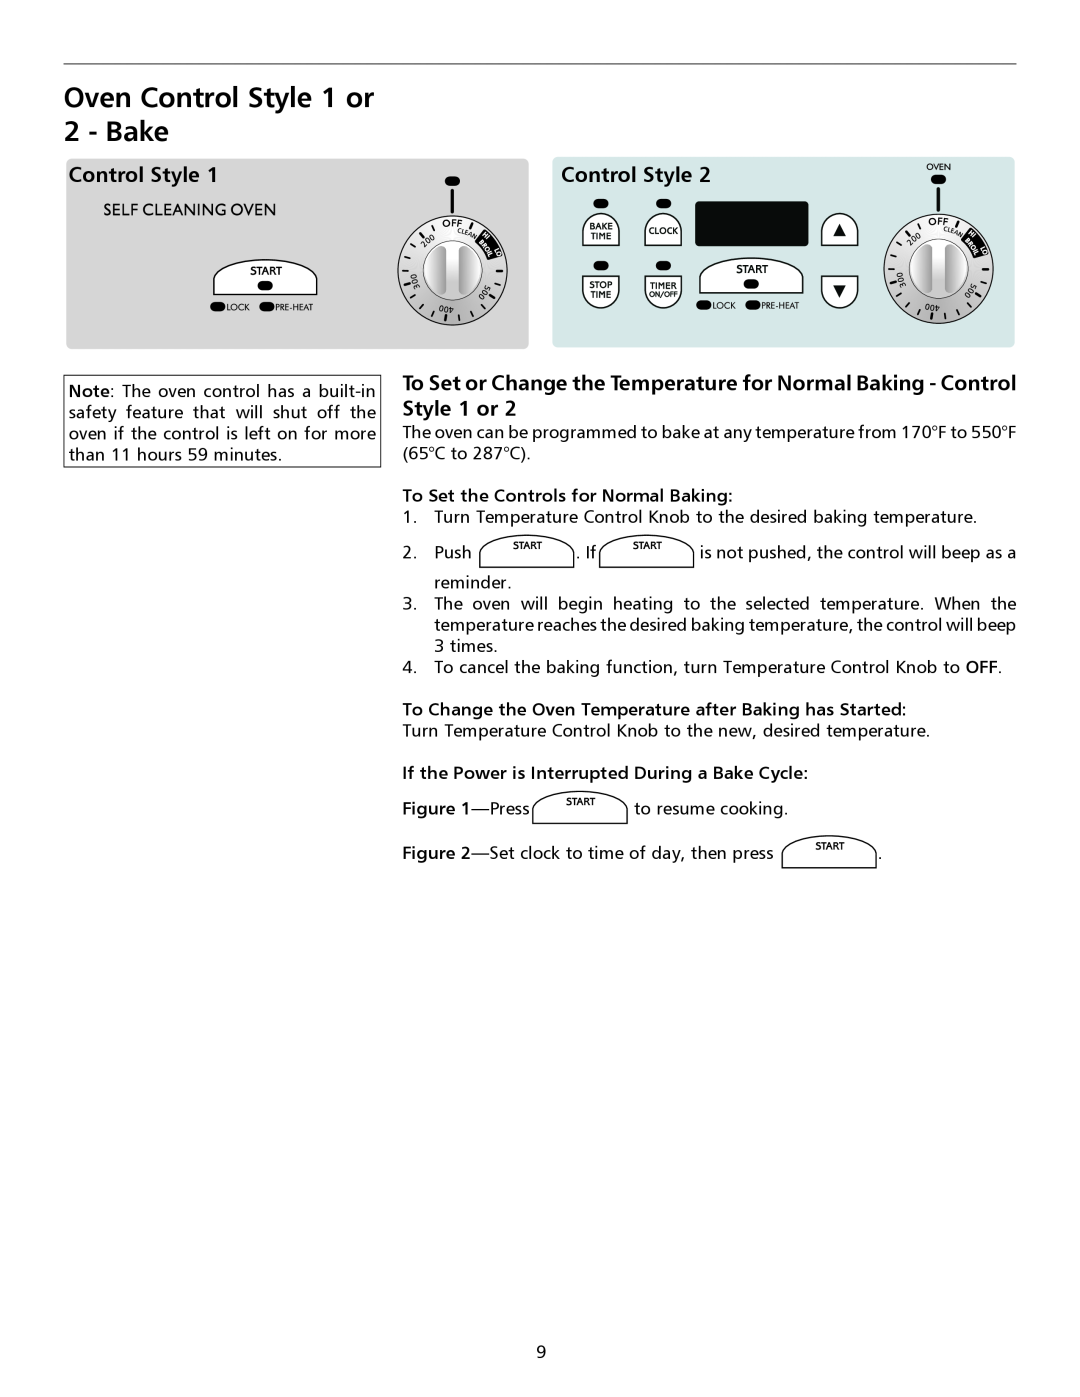 Frigidaire 316135917 important safety instructions Oven Control Style 1 or 2 - Bake, To Set the Controls for Normal Baking 